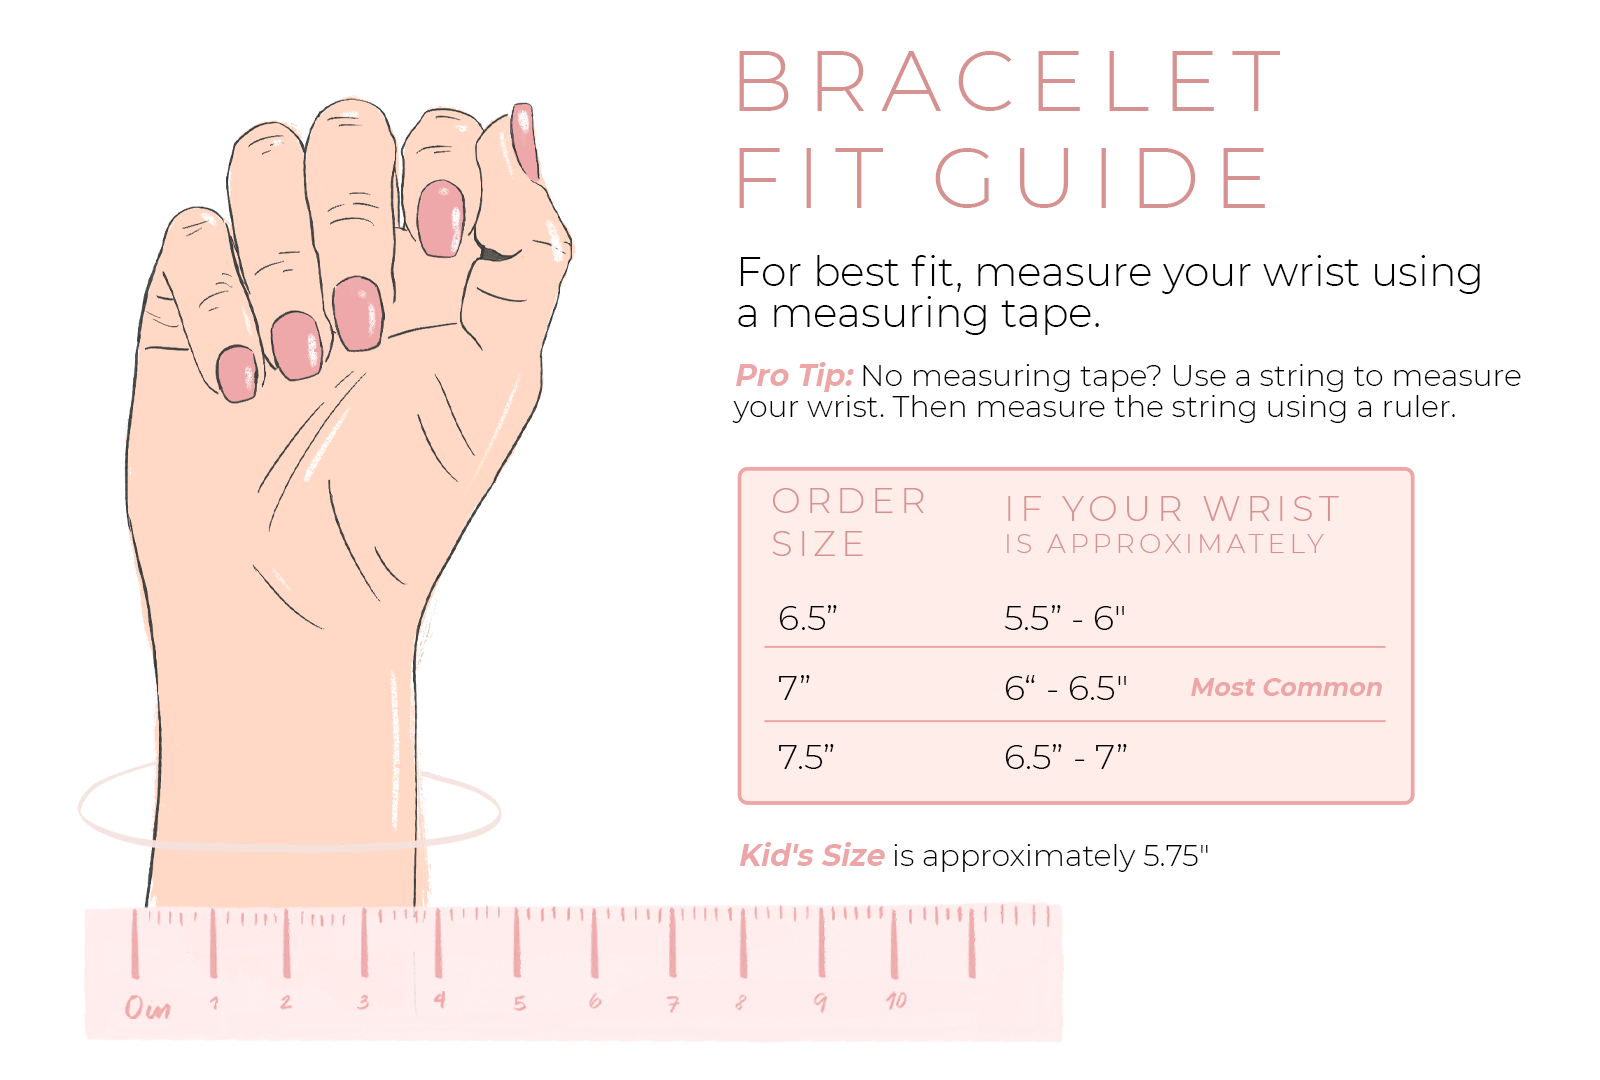 Bracelet fit guide. 7in most common